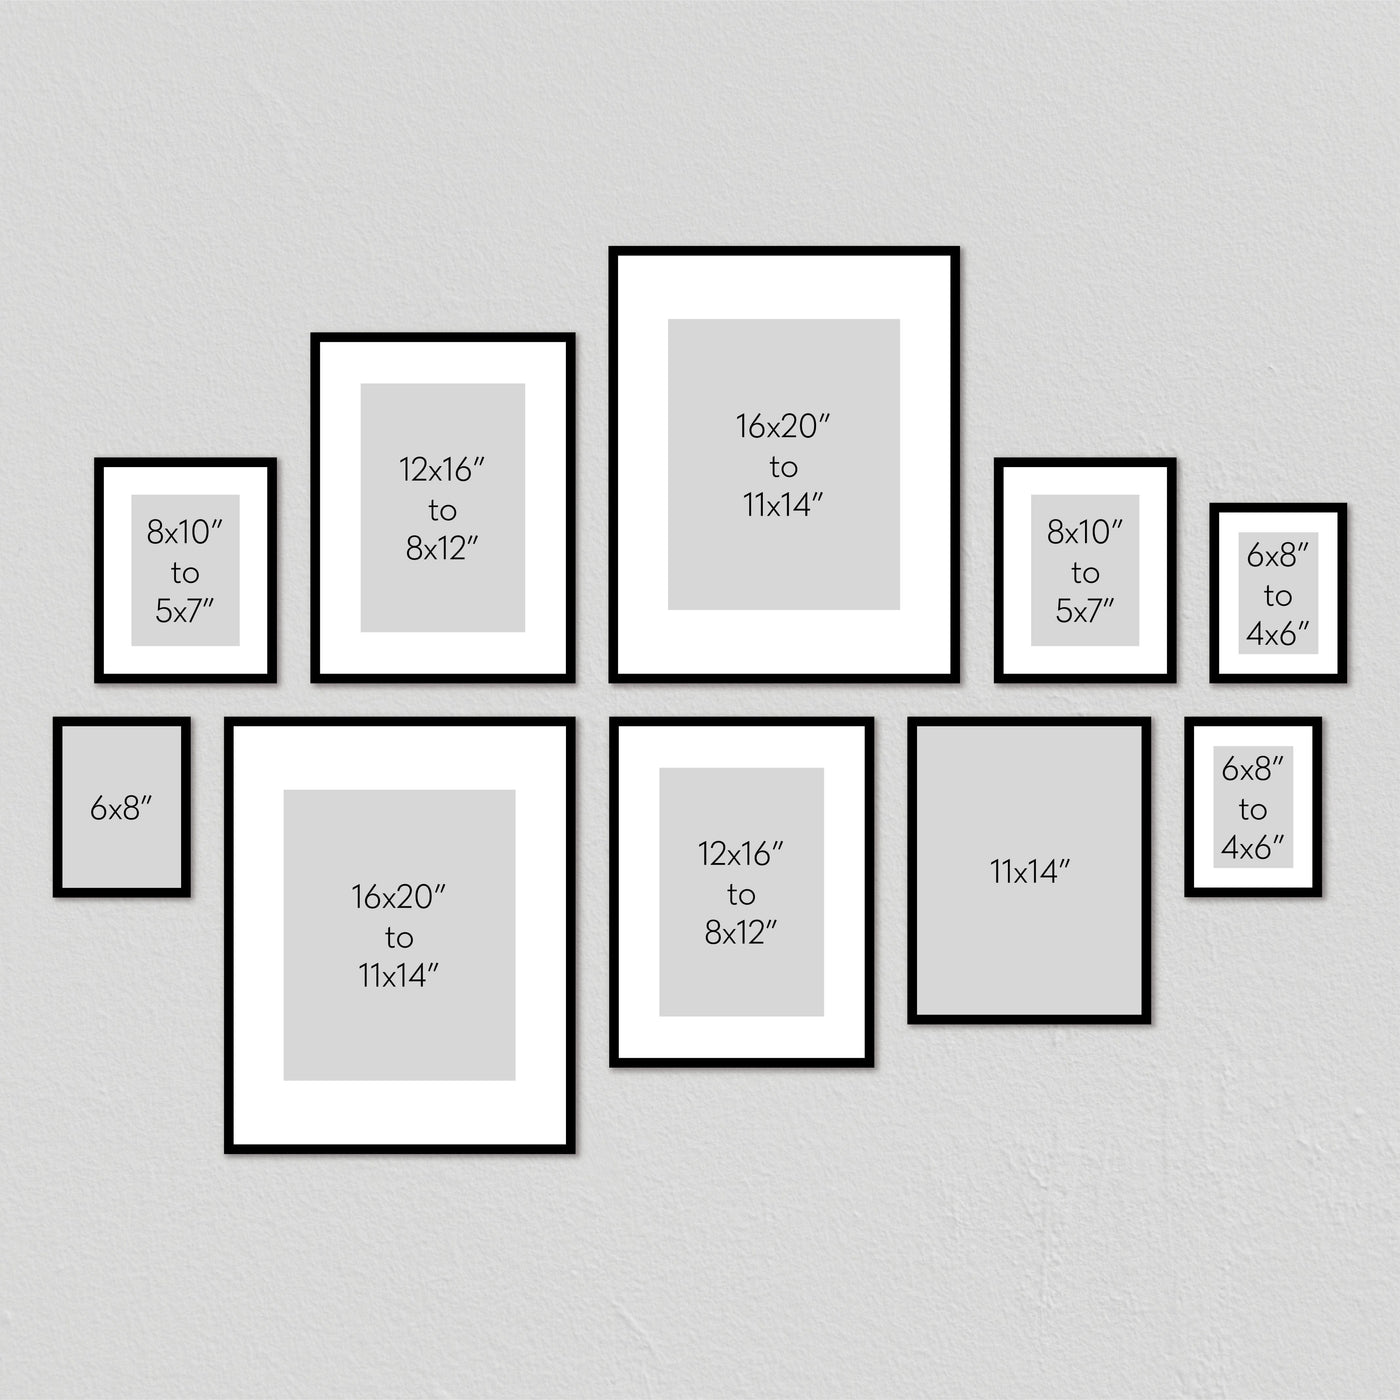 Studio Nova Gallery Photo Wall Frame Set (10 Piece) from our Studio Nova Gallery Photo Wall Frame Sets collection by Profile Products Australia